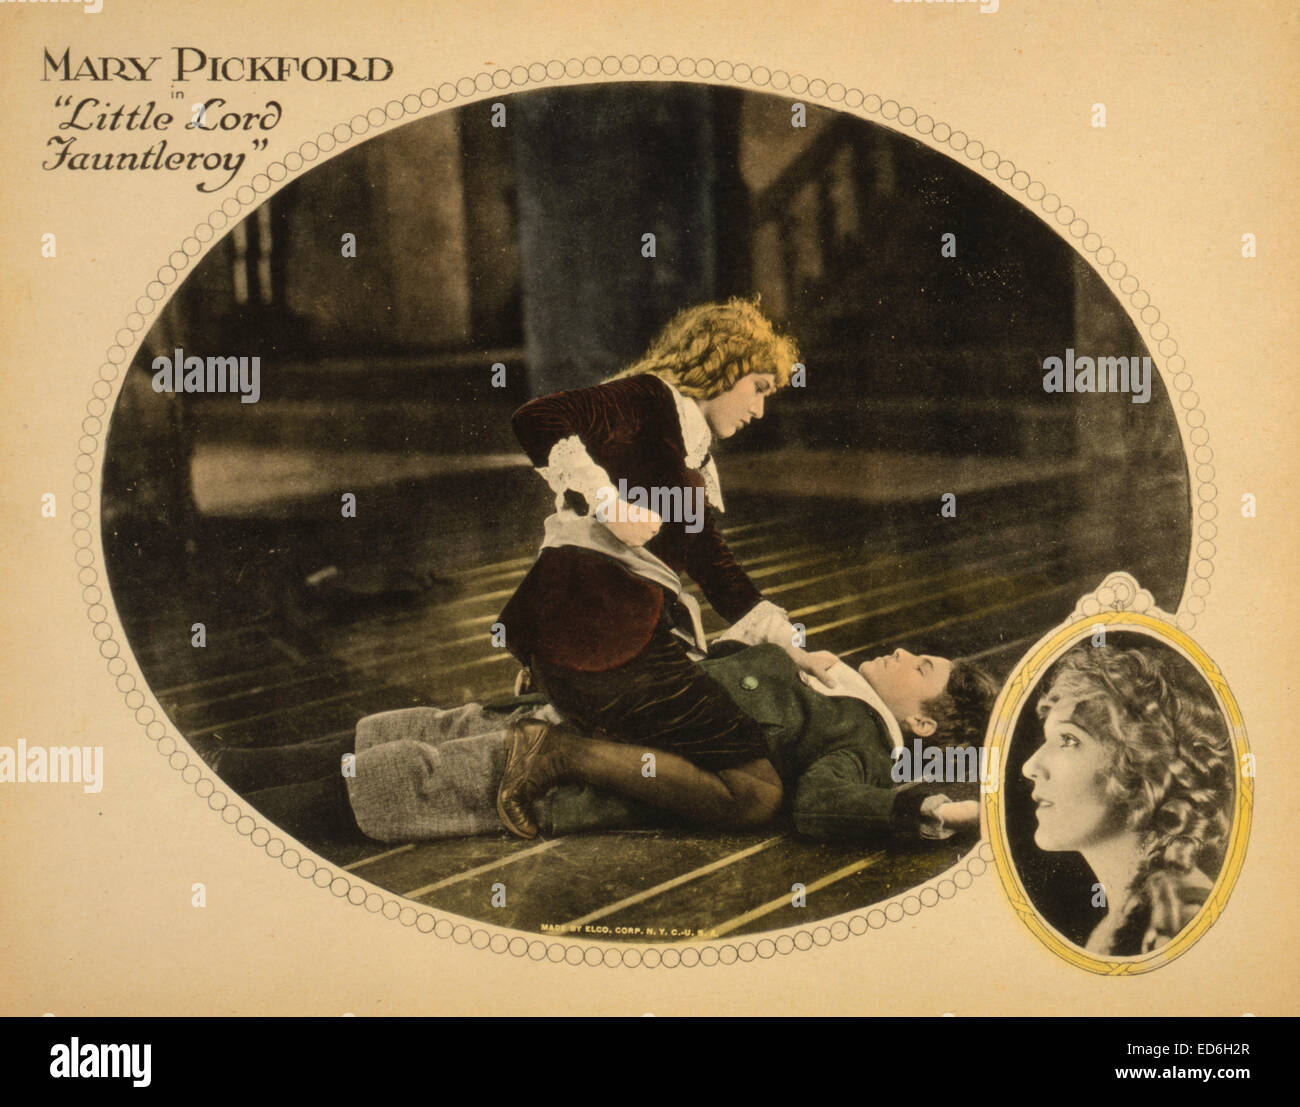 Lobby card showing Mary Pickford about to punch actor Francis Marion during a scene from the film 'Little Lord Fauntleroy,' 1921 Stock Photo